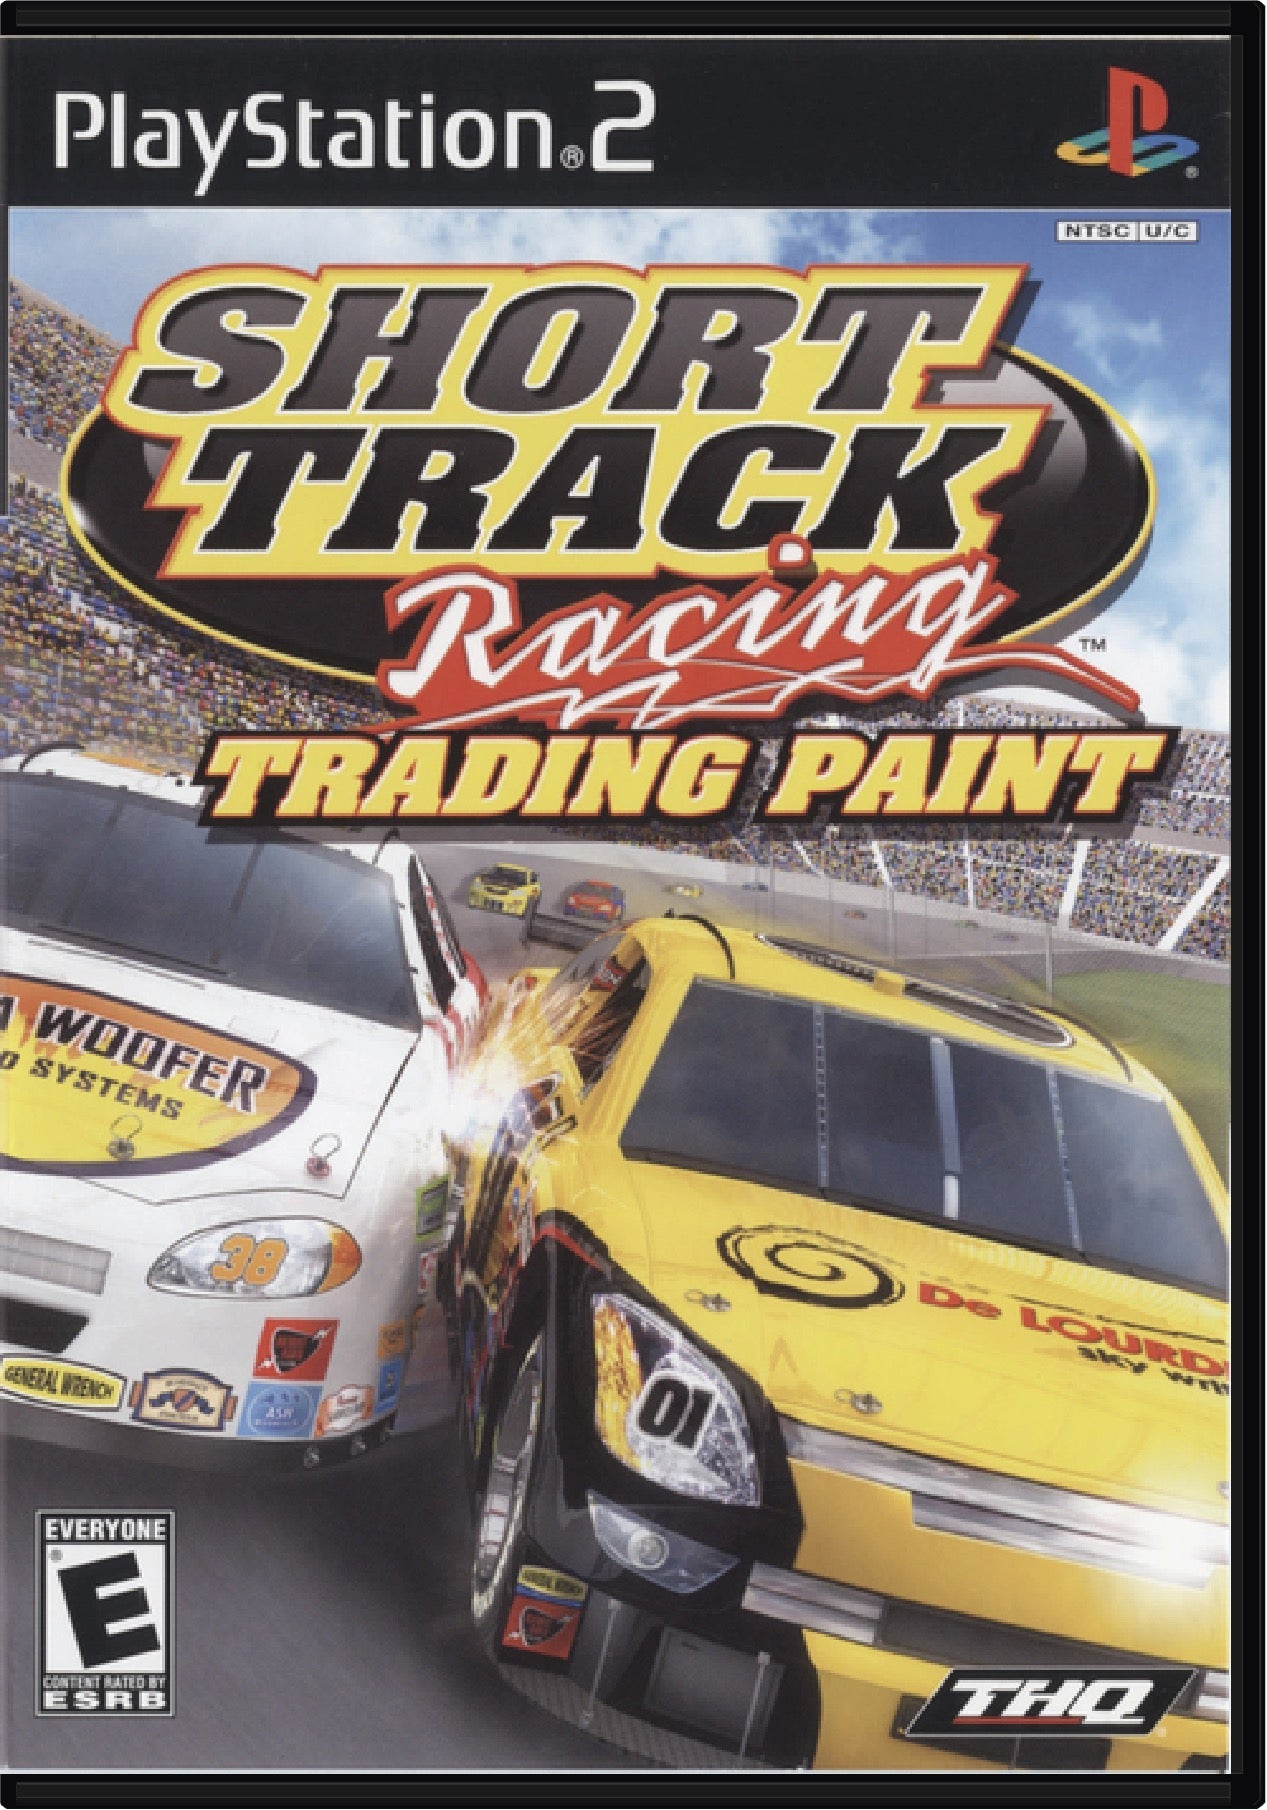 Short Track Racing Cover Art and Product Photo